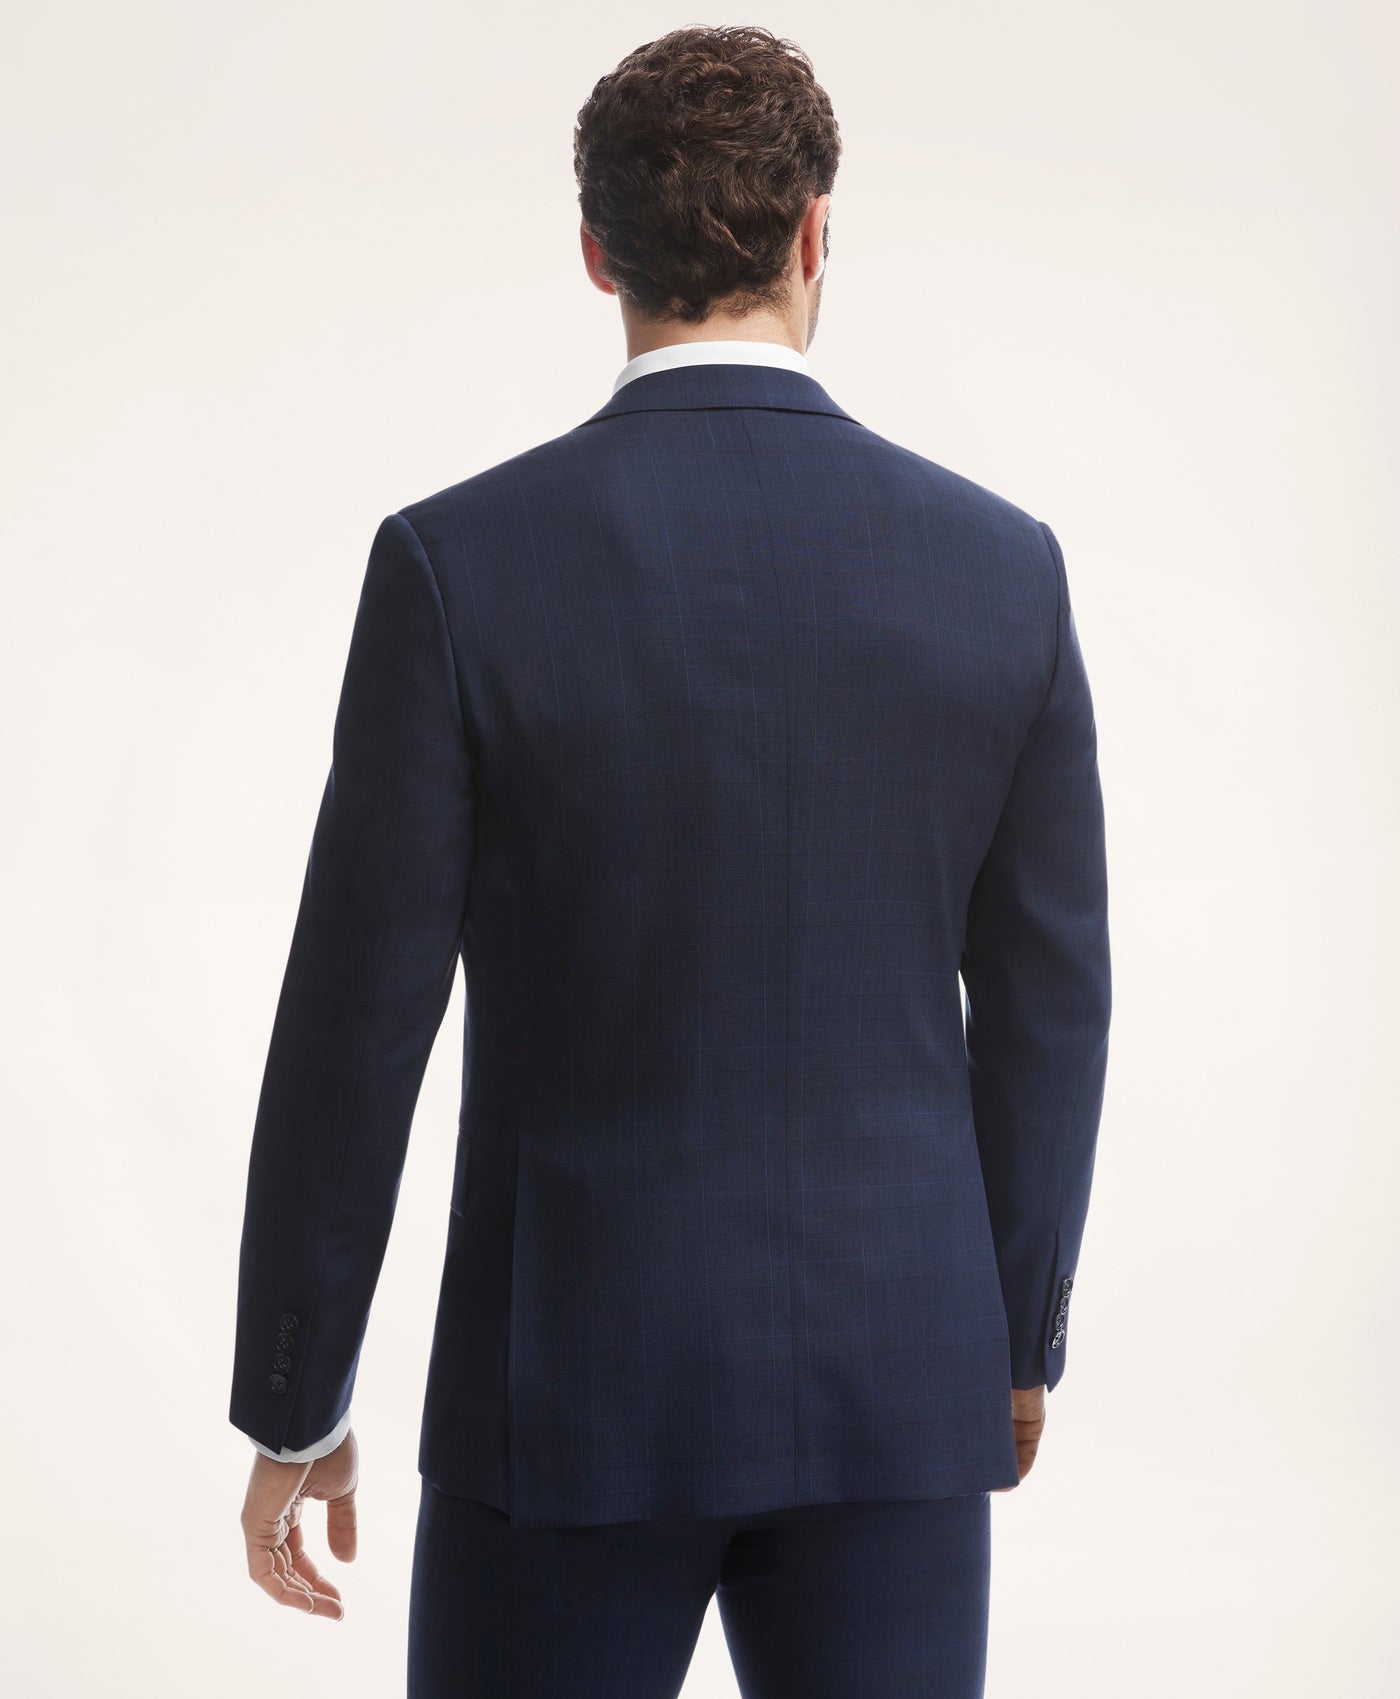 Regent Fit Check 1818 Suit - Brooks Brothers Canada